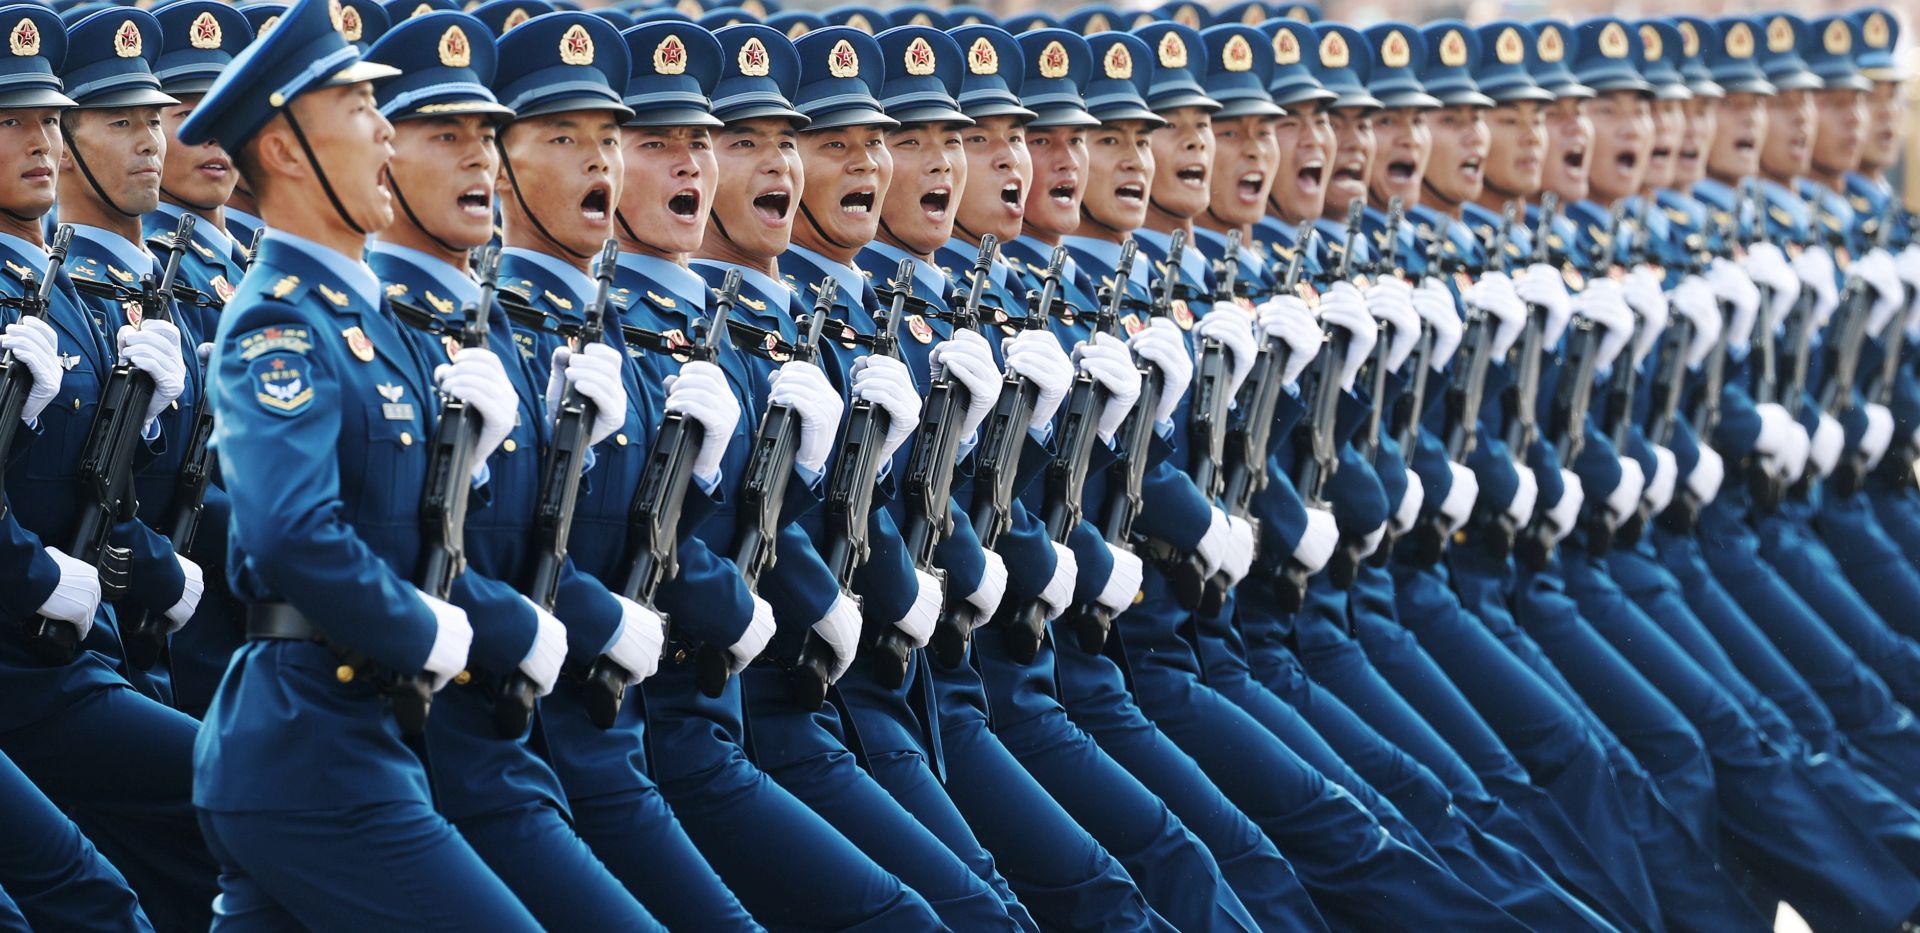 epa07884190 Military troops march past Tiananmen Square during a military parade marking the 70th anniversary of the founding of the People's Republic of China, in Beijing, China, 01 October 2019. China commemorates the 70th anniversary of the founding of the People's Republic of China on 01 October 2019 with a grand military parade and mass pageant.  EPA/WU HONG